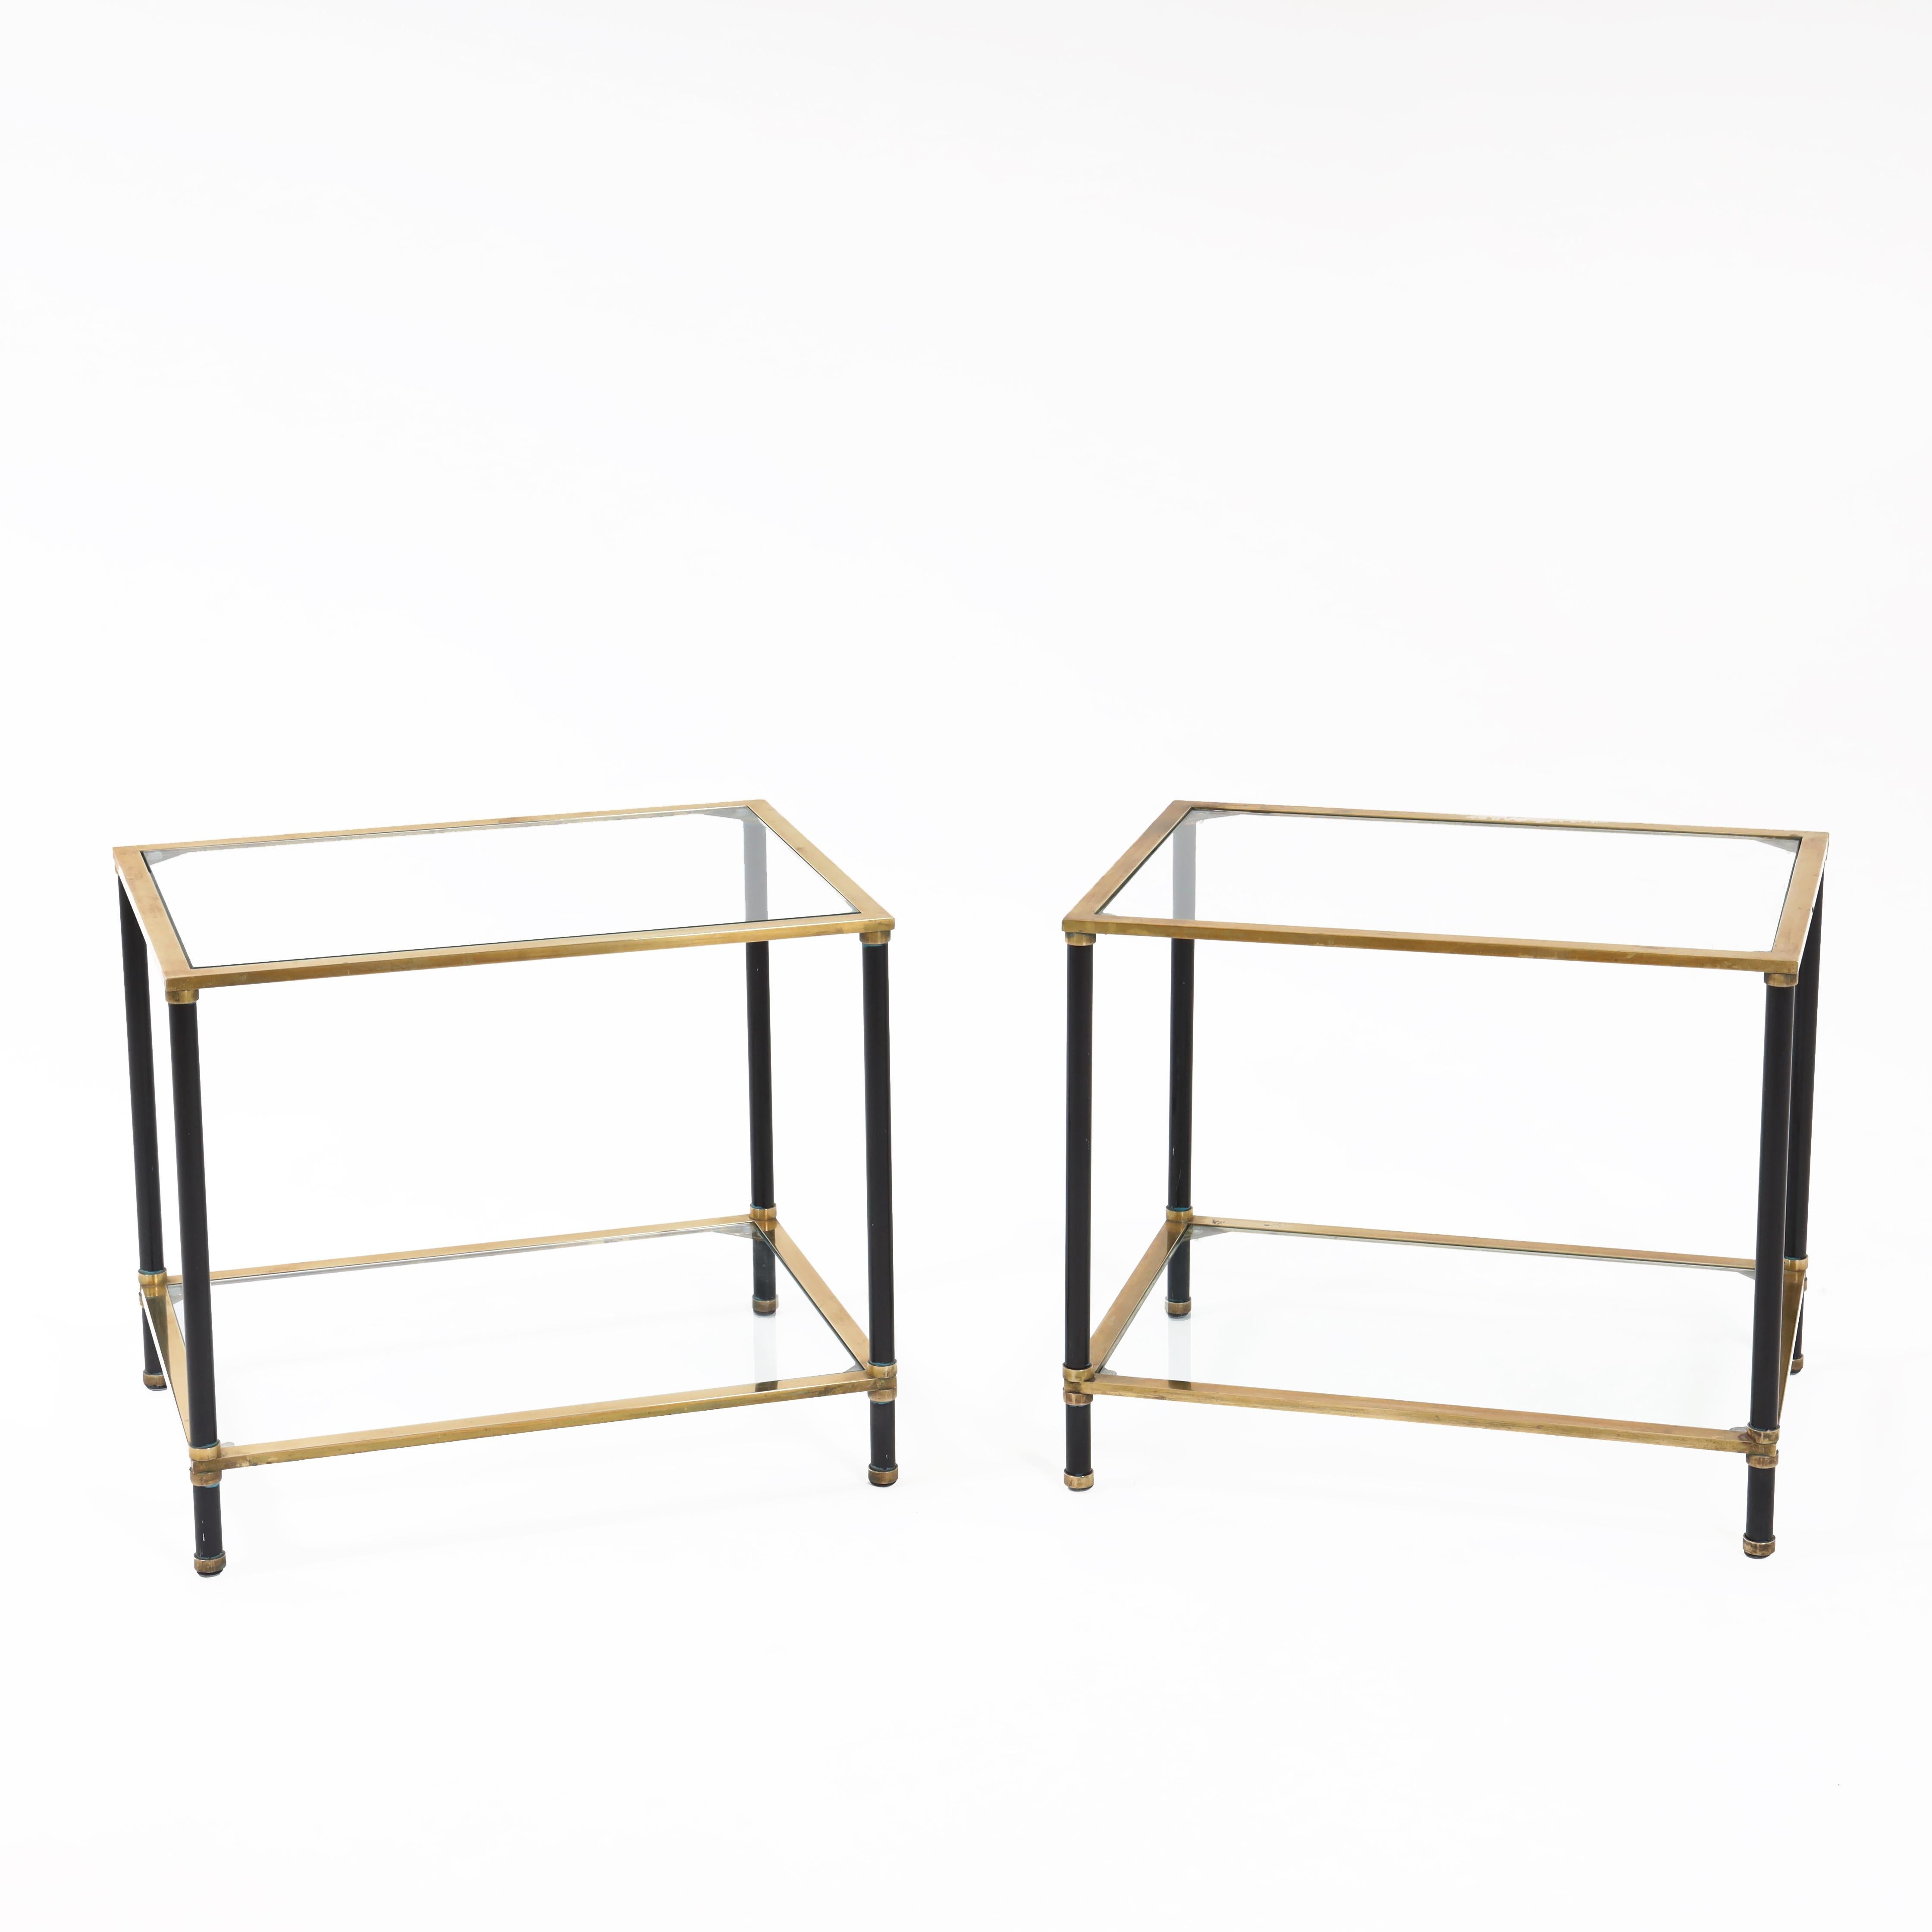 A pair of Italian modernist two tier side tables. 
Brass with ebonized leg details and glass.